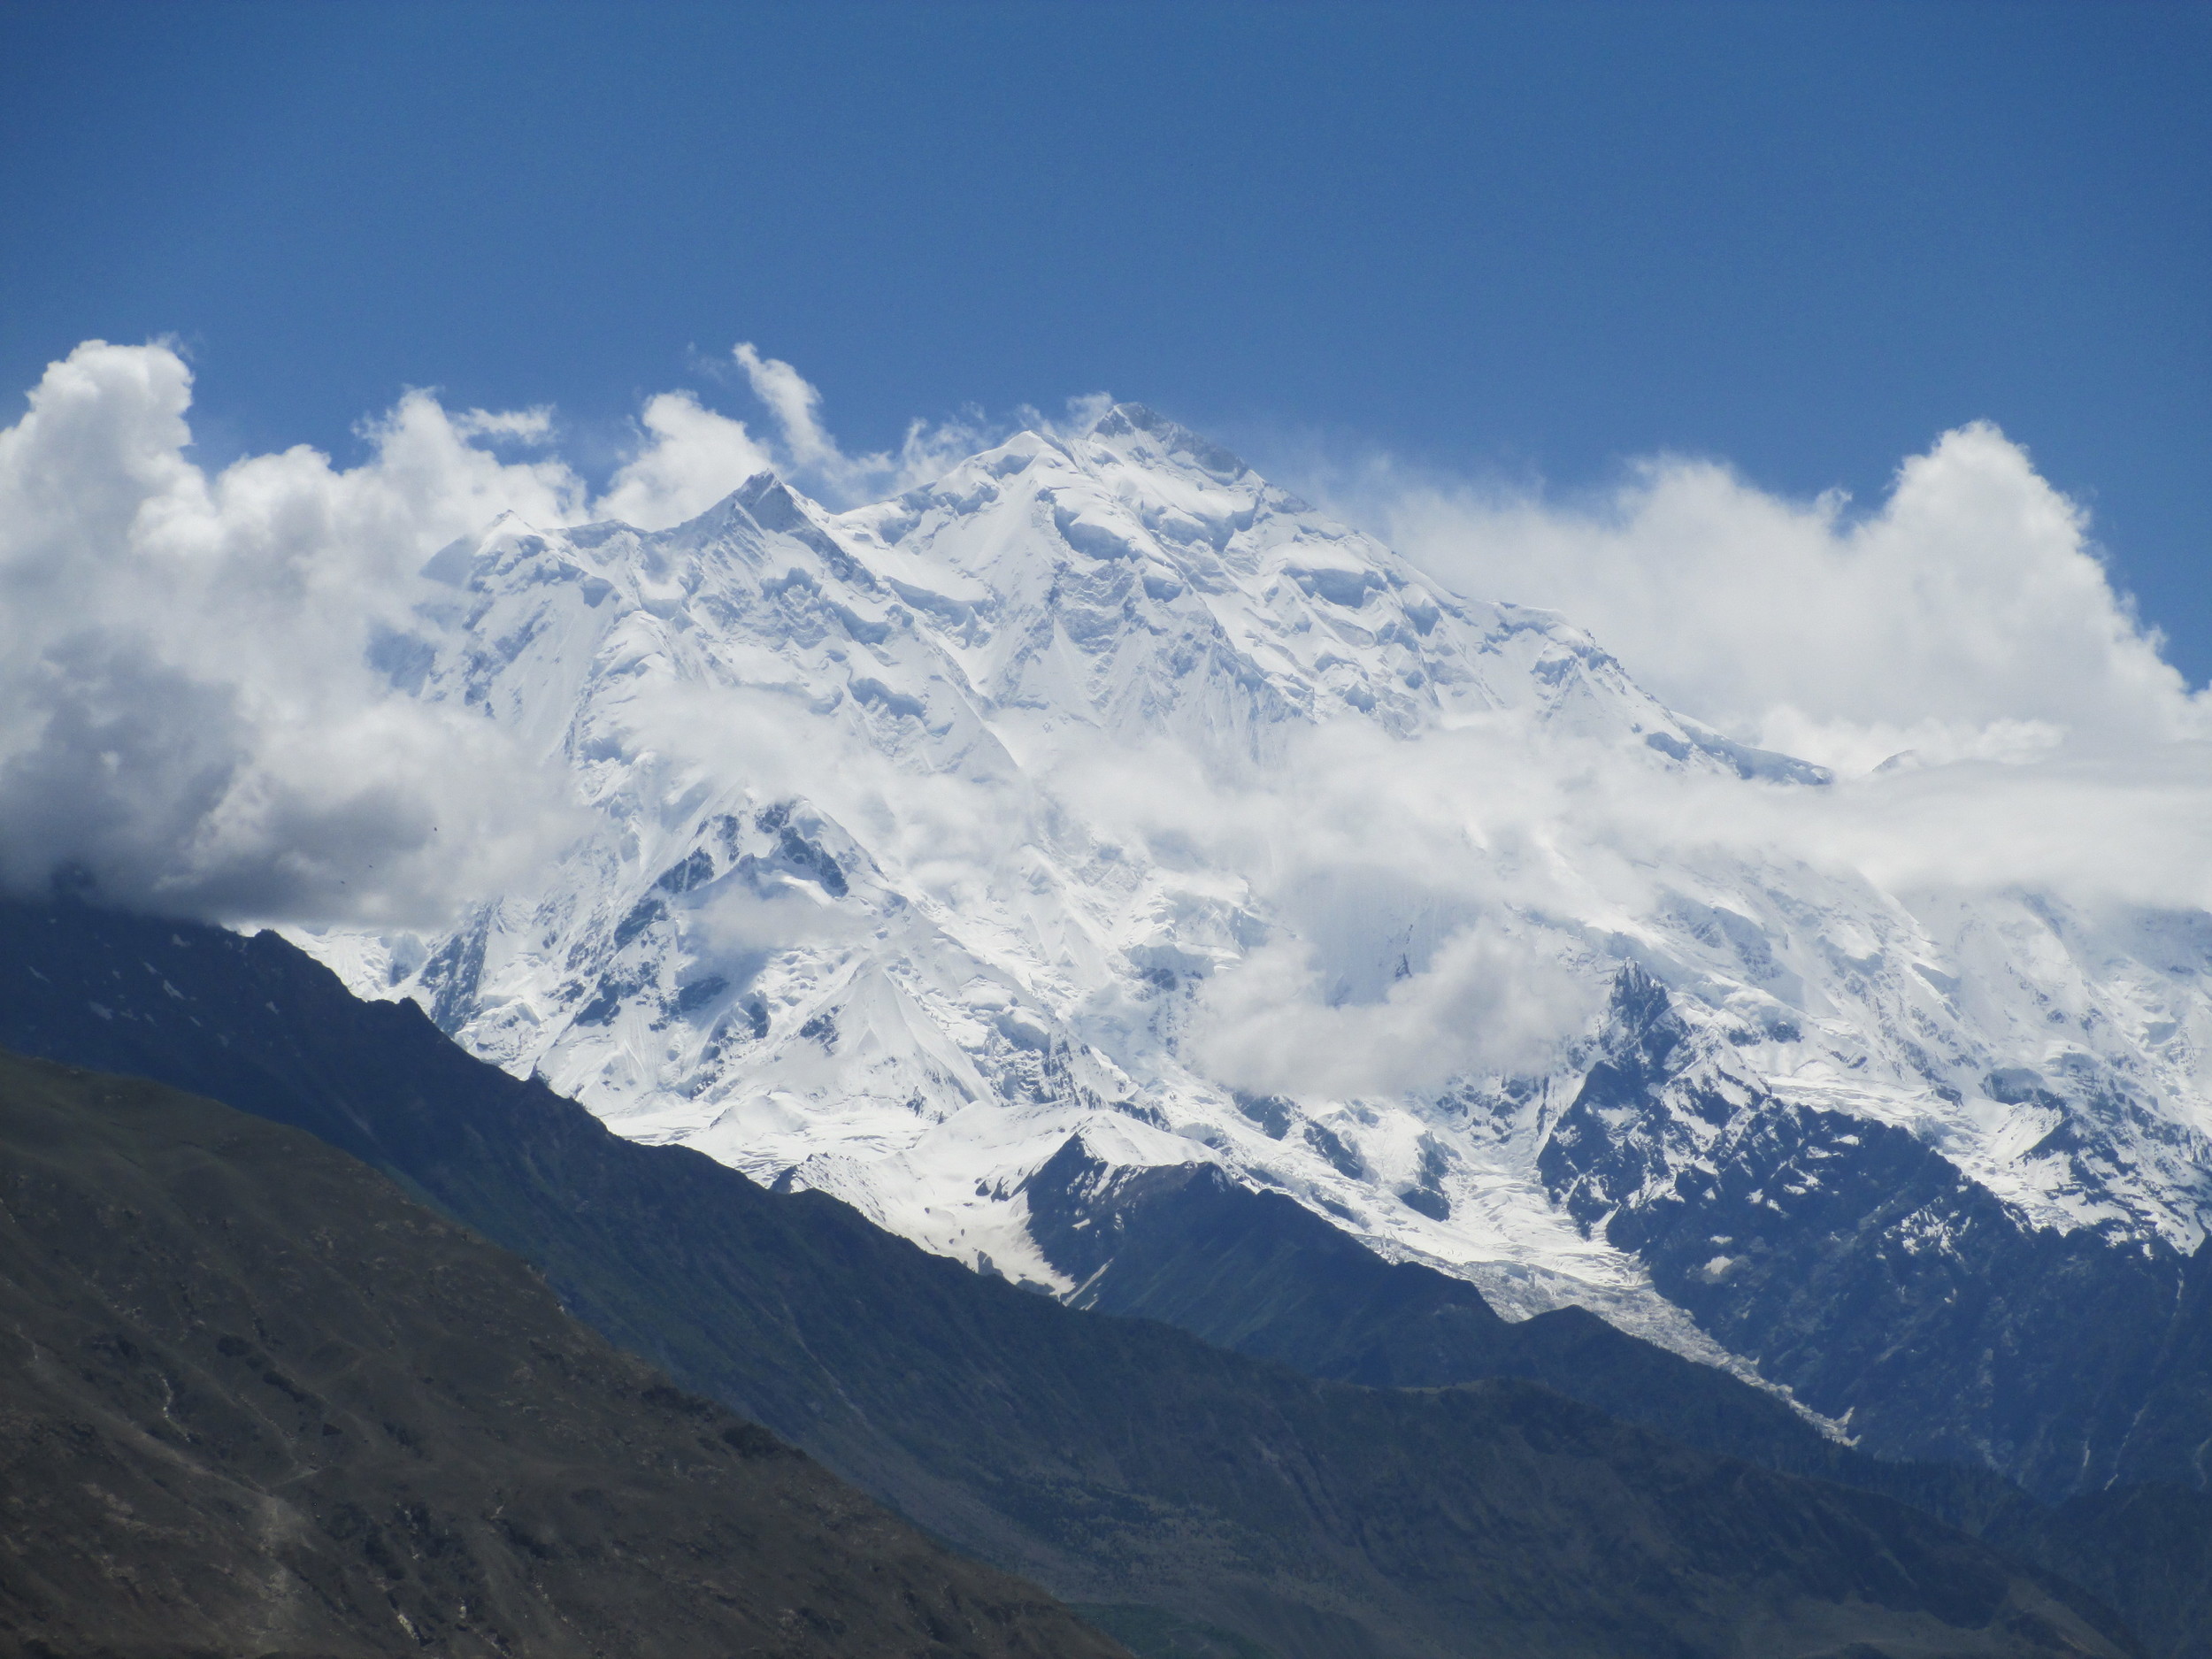     
 
 
      "the mountain appeared unclimbable from any of the routes we prospected"&nbsp; Austo - German expedition to Rakaposhi 1954       
 Normal 
 0 
 
 
 
 
 false 
 false 
 false 
 
 EN-US 
 X-NONE 
 X-NONE 
 
  
  
  
  
  
  
  
  
  
  
